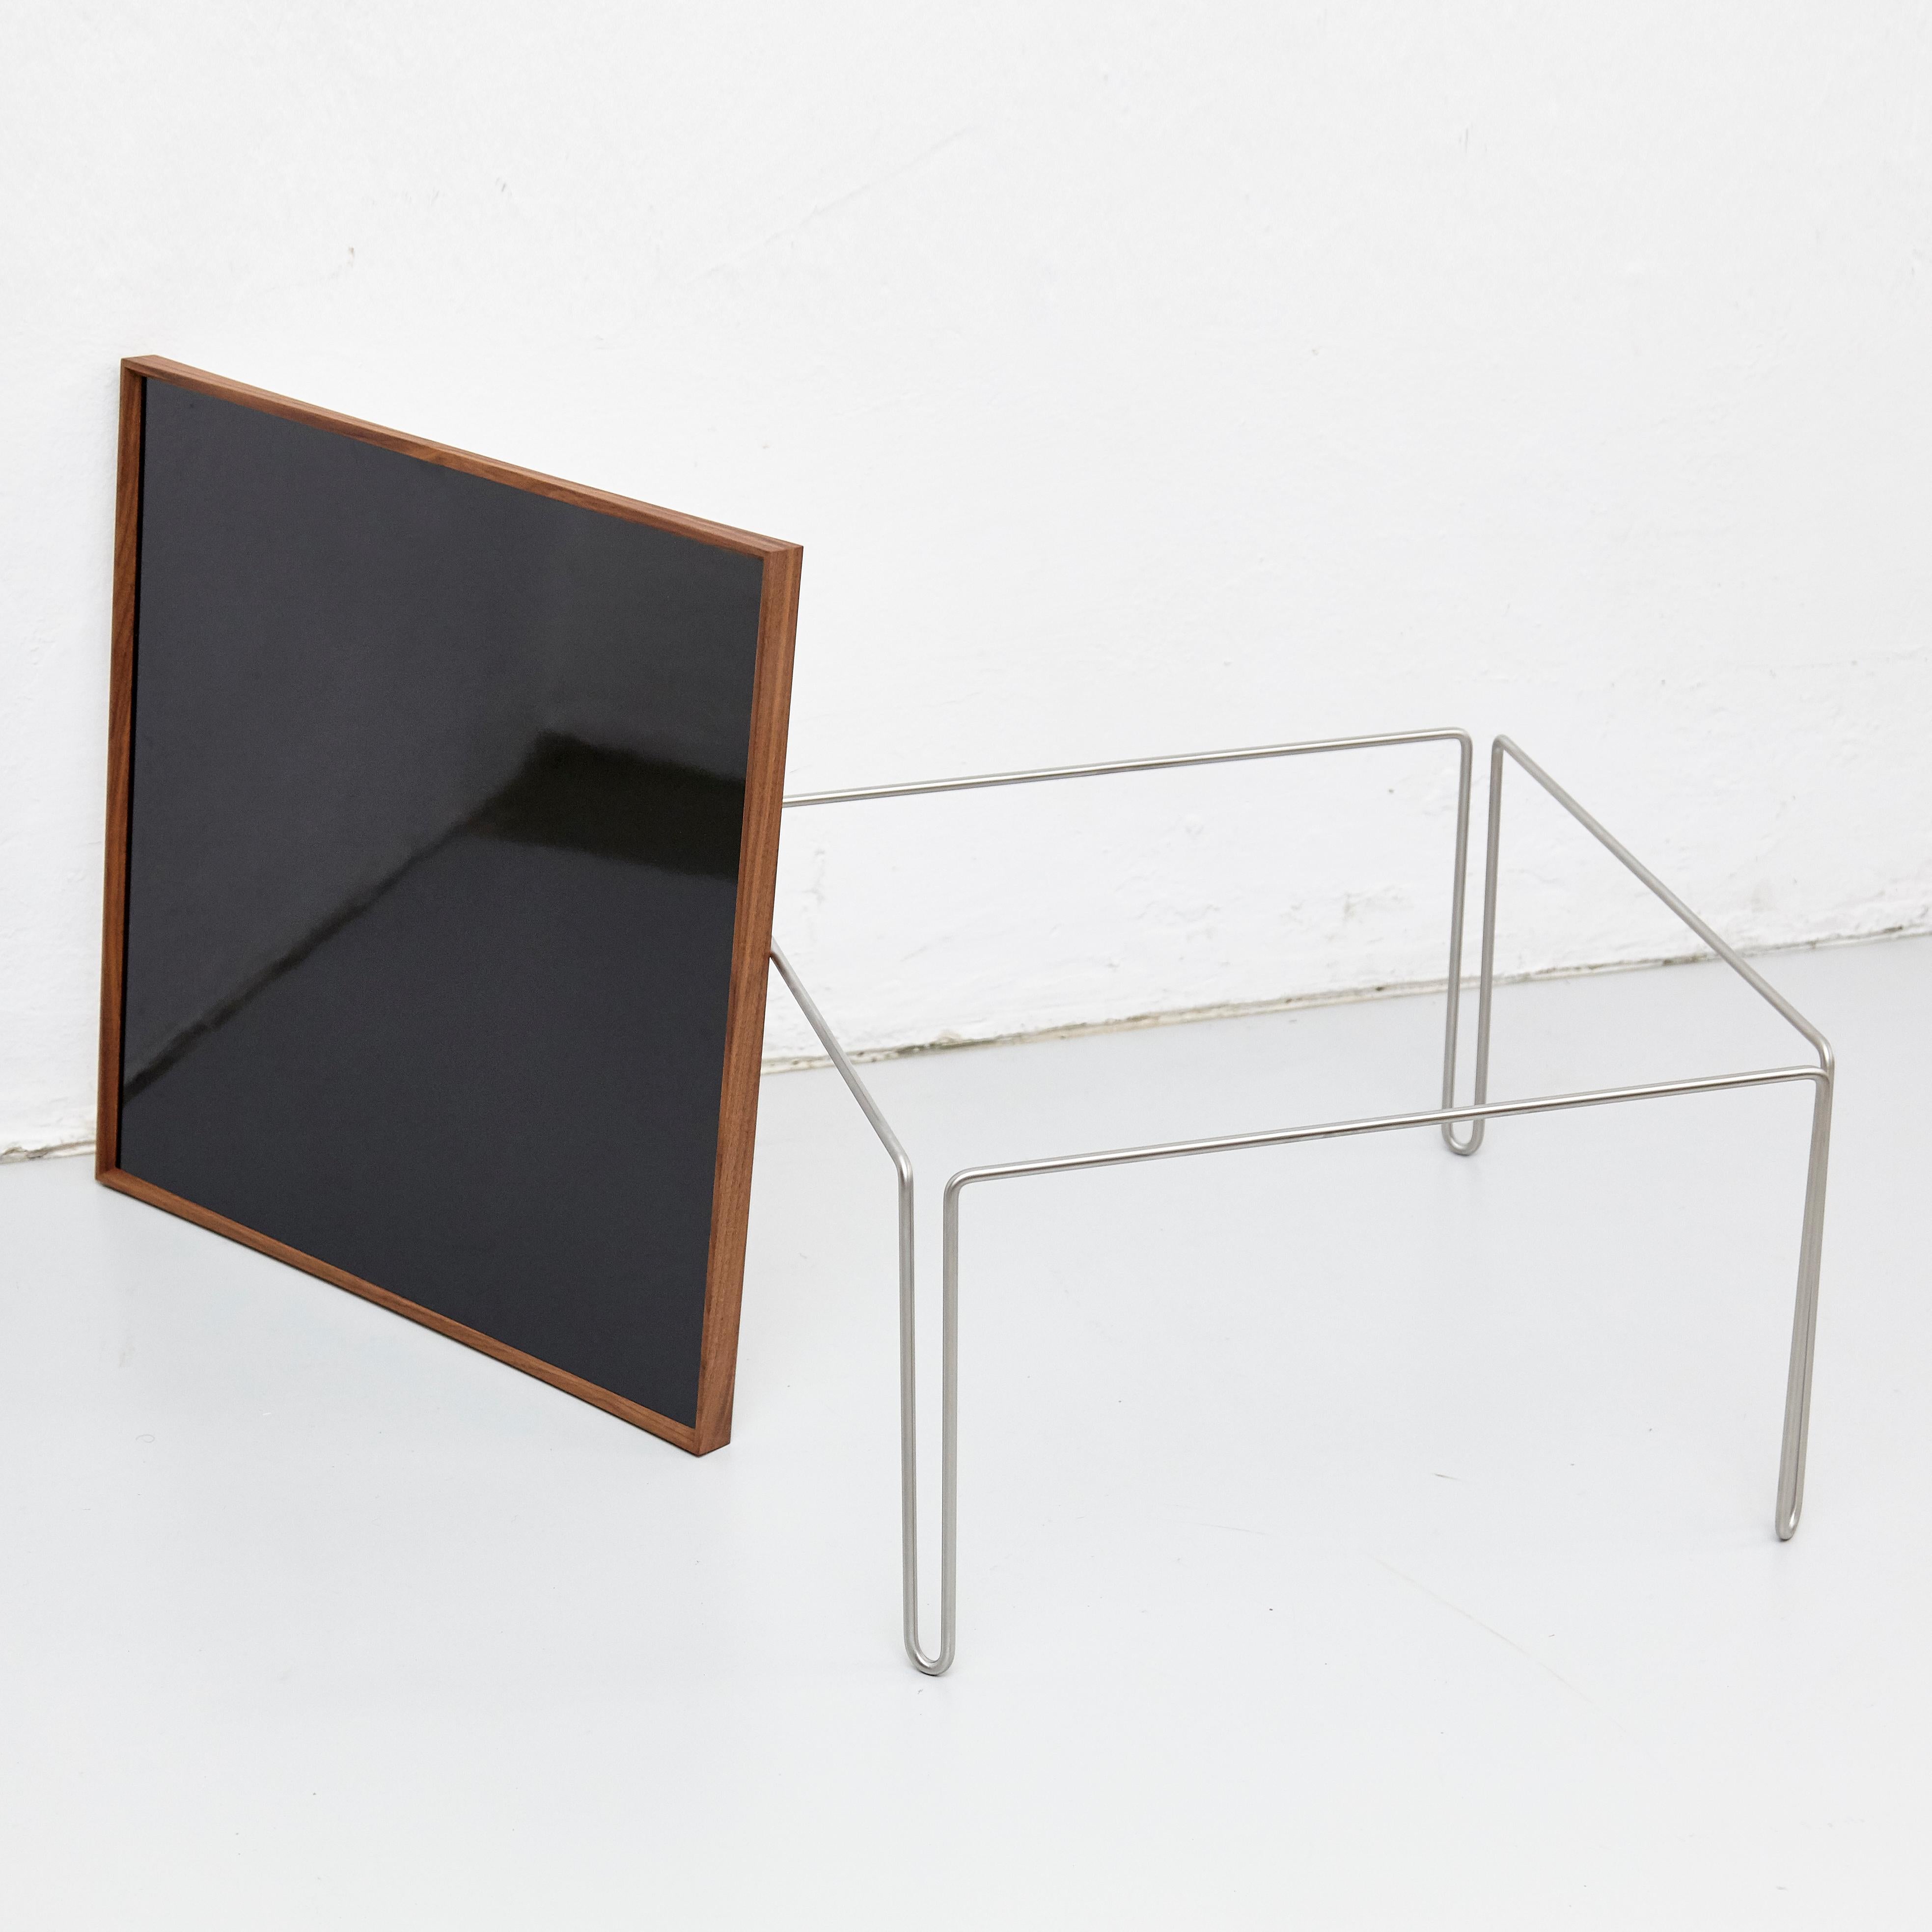 Contemporary Finn Juhl Tray Table, Wood, High Gloss Black and White Laminate and Steel